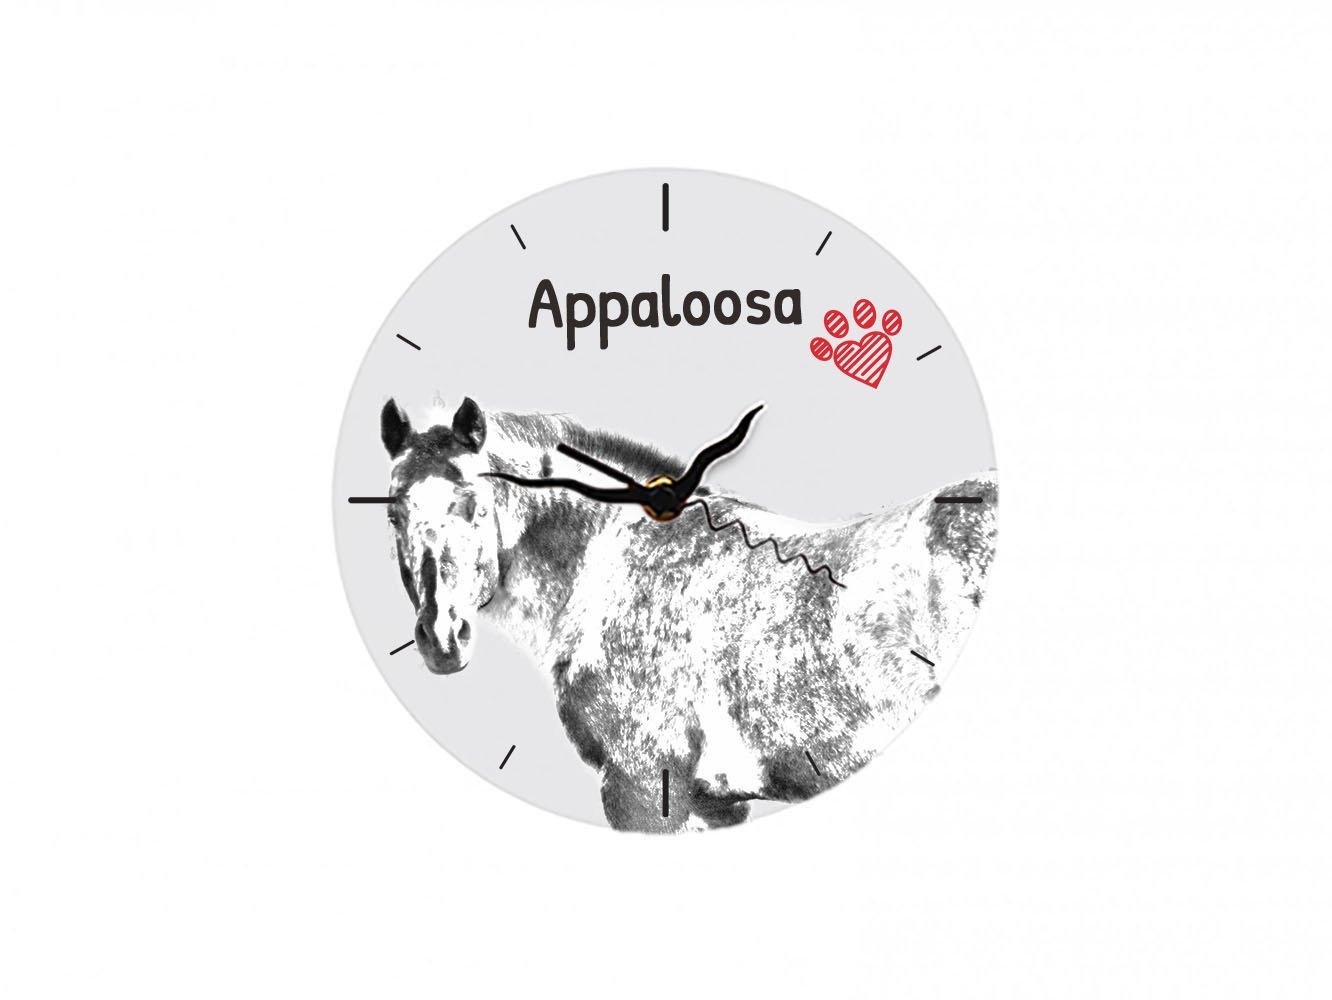 Primary image for Appaloosa, Free standing MDF floor clock with an image of a horse.